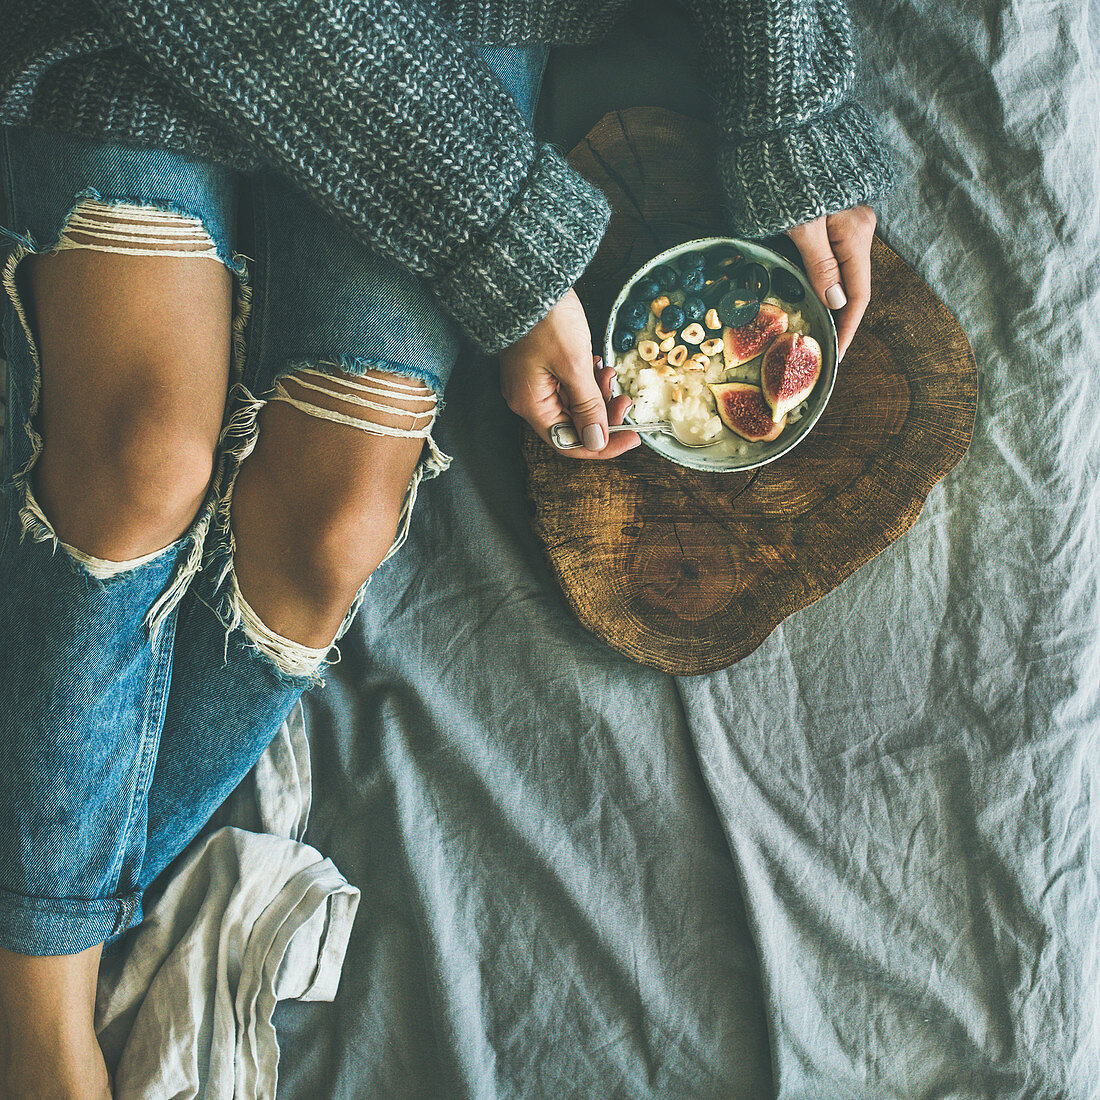 Woman in sweater and jeans eating rice coconut porridge with figs, berries, hazelnuts